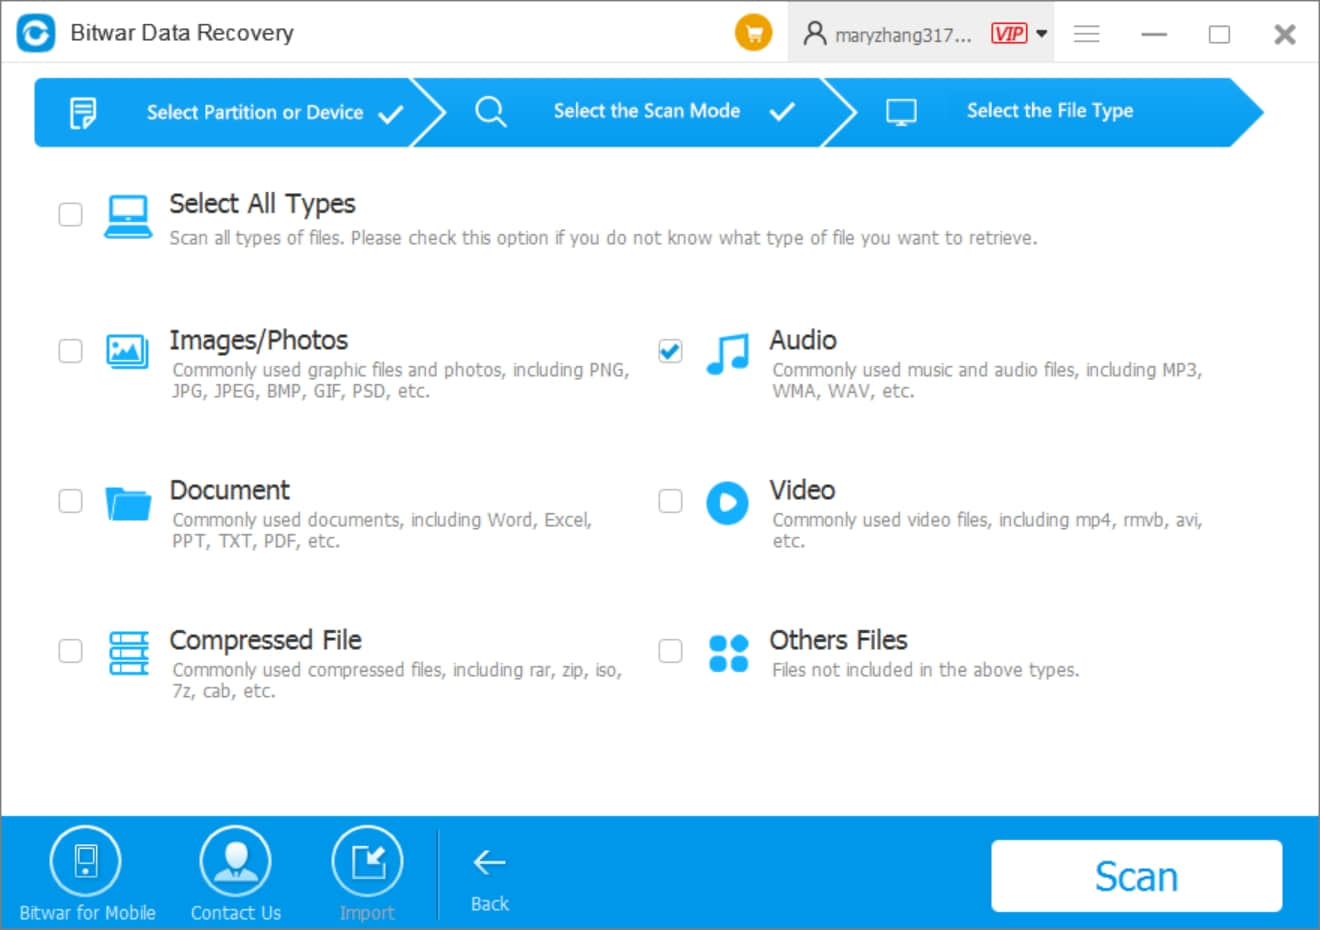 5-Data Recovery-Formatted Musics Recovery-Select Audio